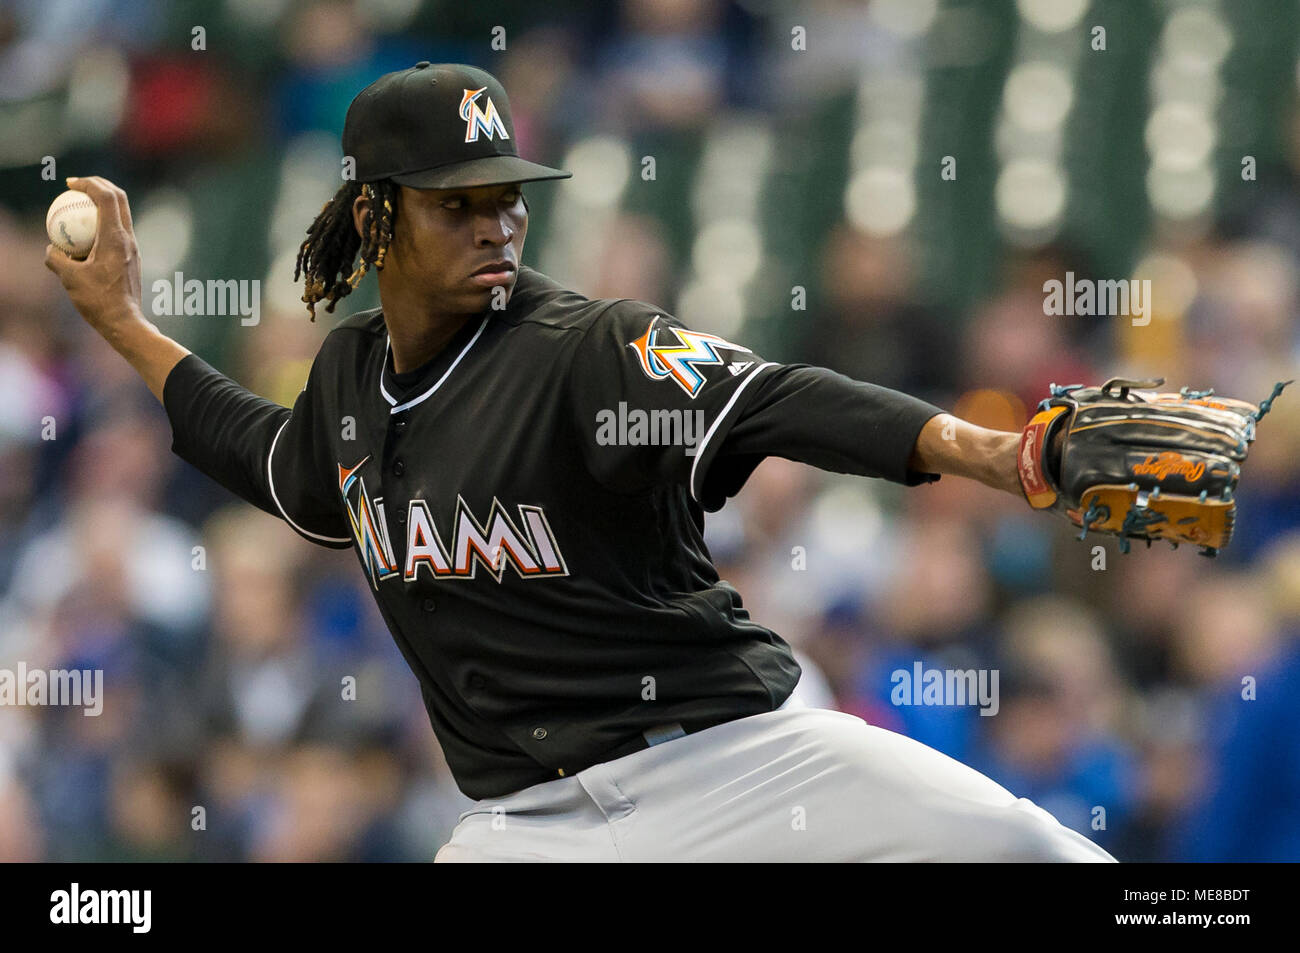 Milwaukee, WI, USA. 21st Apr, 2018. Miami Marlins starting pitcher Jose Urena #62 delivers a pitch in the first inning of the Major League Baseball game between the Milwaukee Brewers and the Miami Marlins at Miller Park in Milwaukee, WI. John Fisher/CSM/Alamy Live News Stock Photo